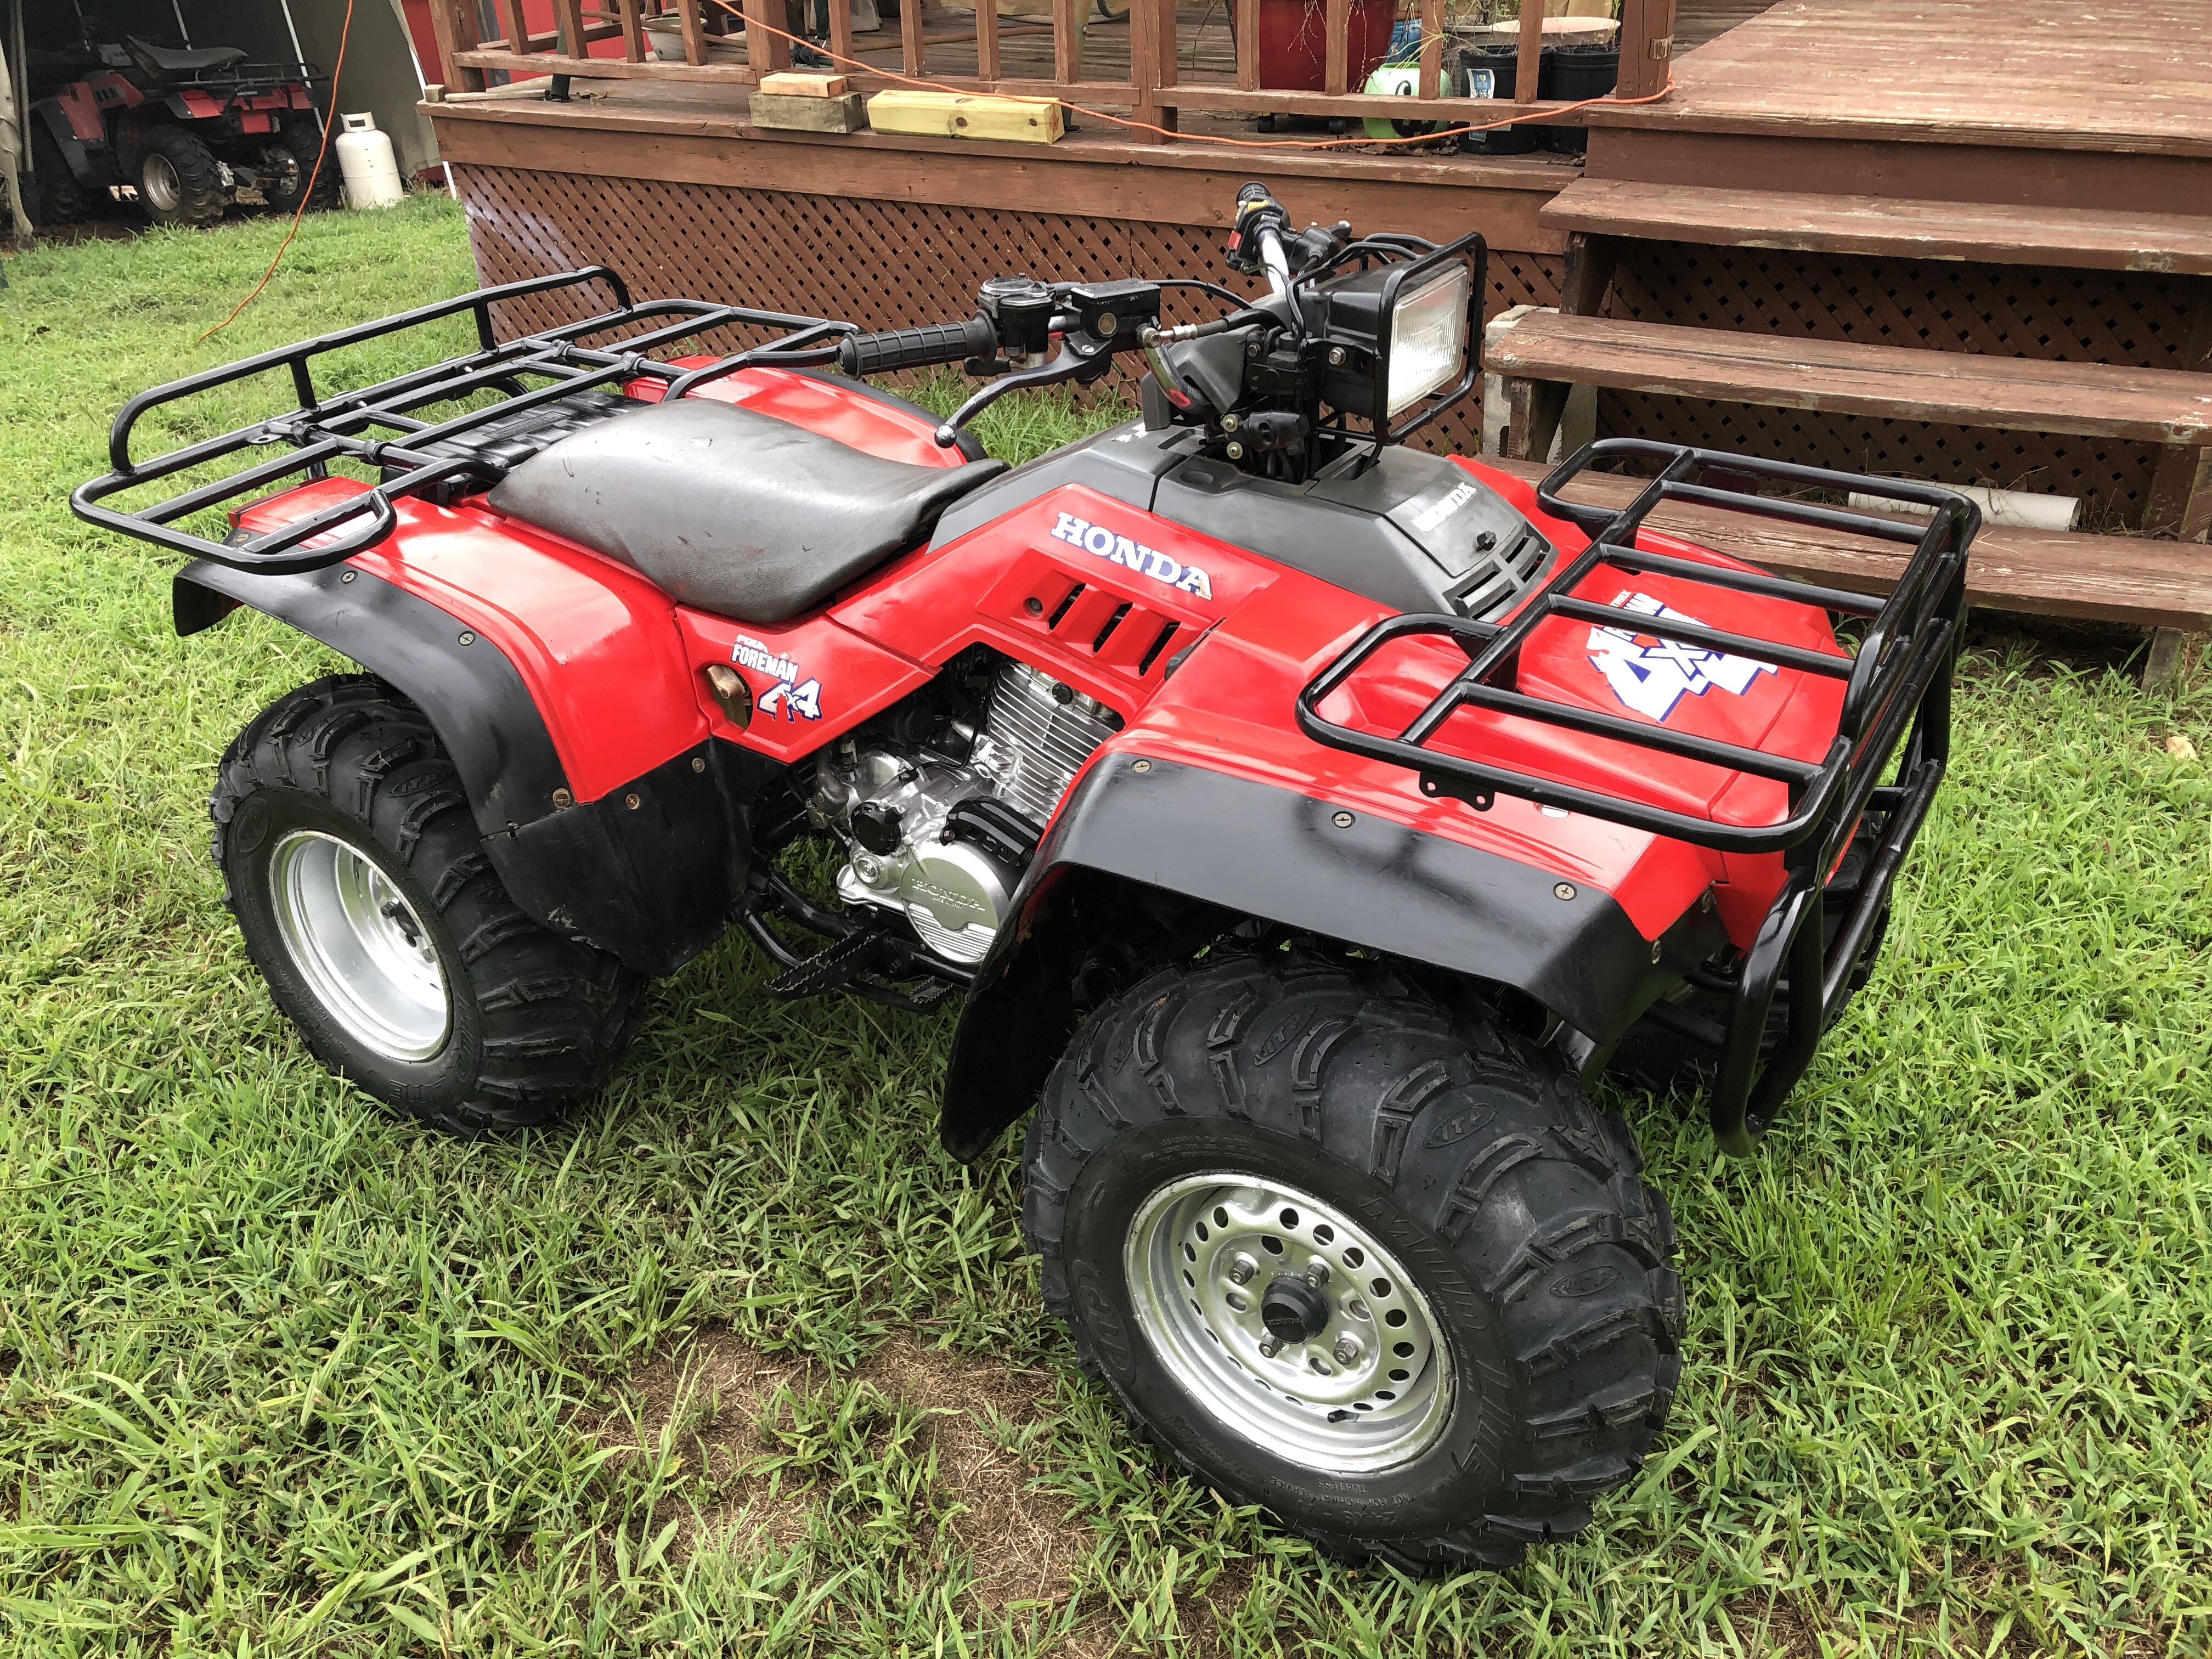 1987 trx350D foreman 4x4 - For Sale - Trade - Wanted - ATV Honda